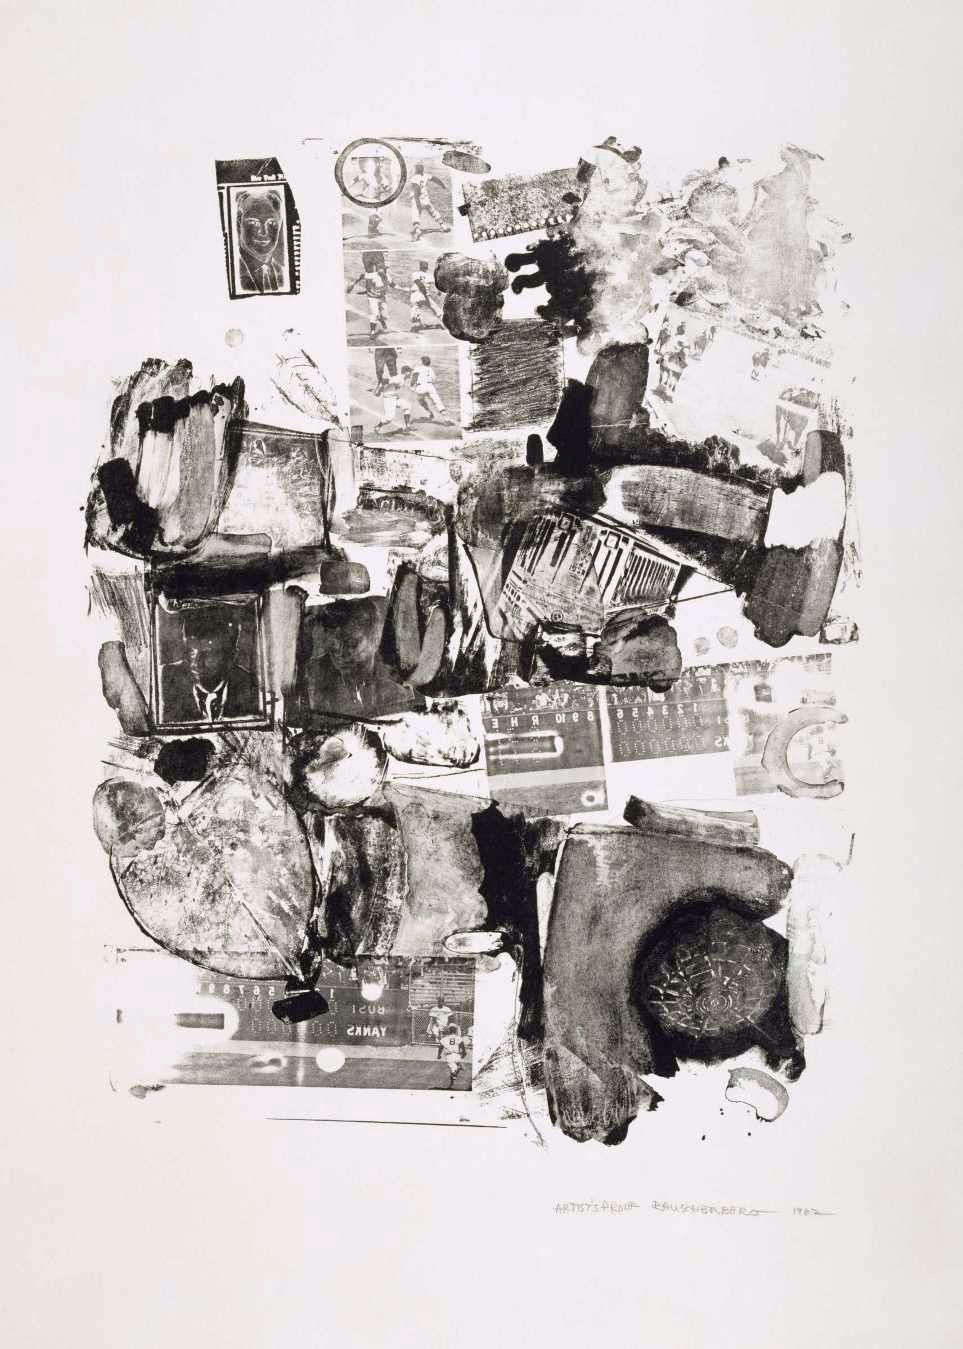 Selected Prints Robert Rauschenberg from the MFAH Collection (September 21–December 11, 2011) | The Museum of Fine Arts, Houston